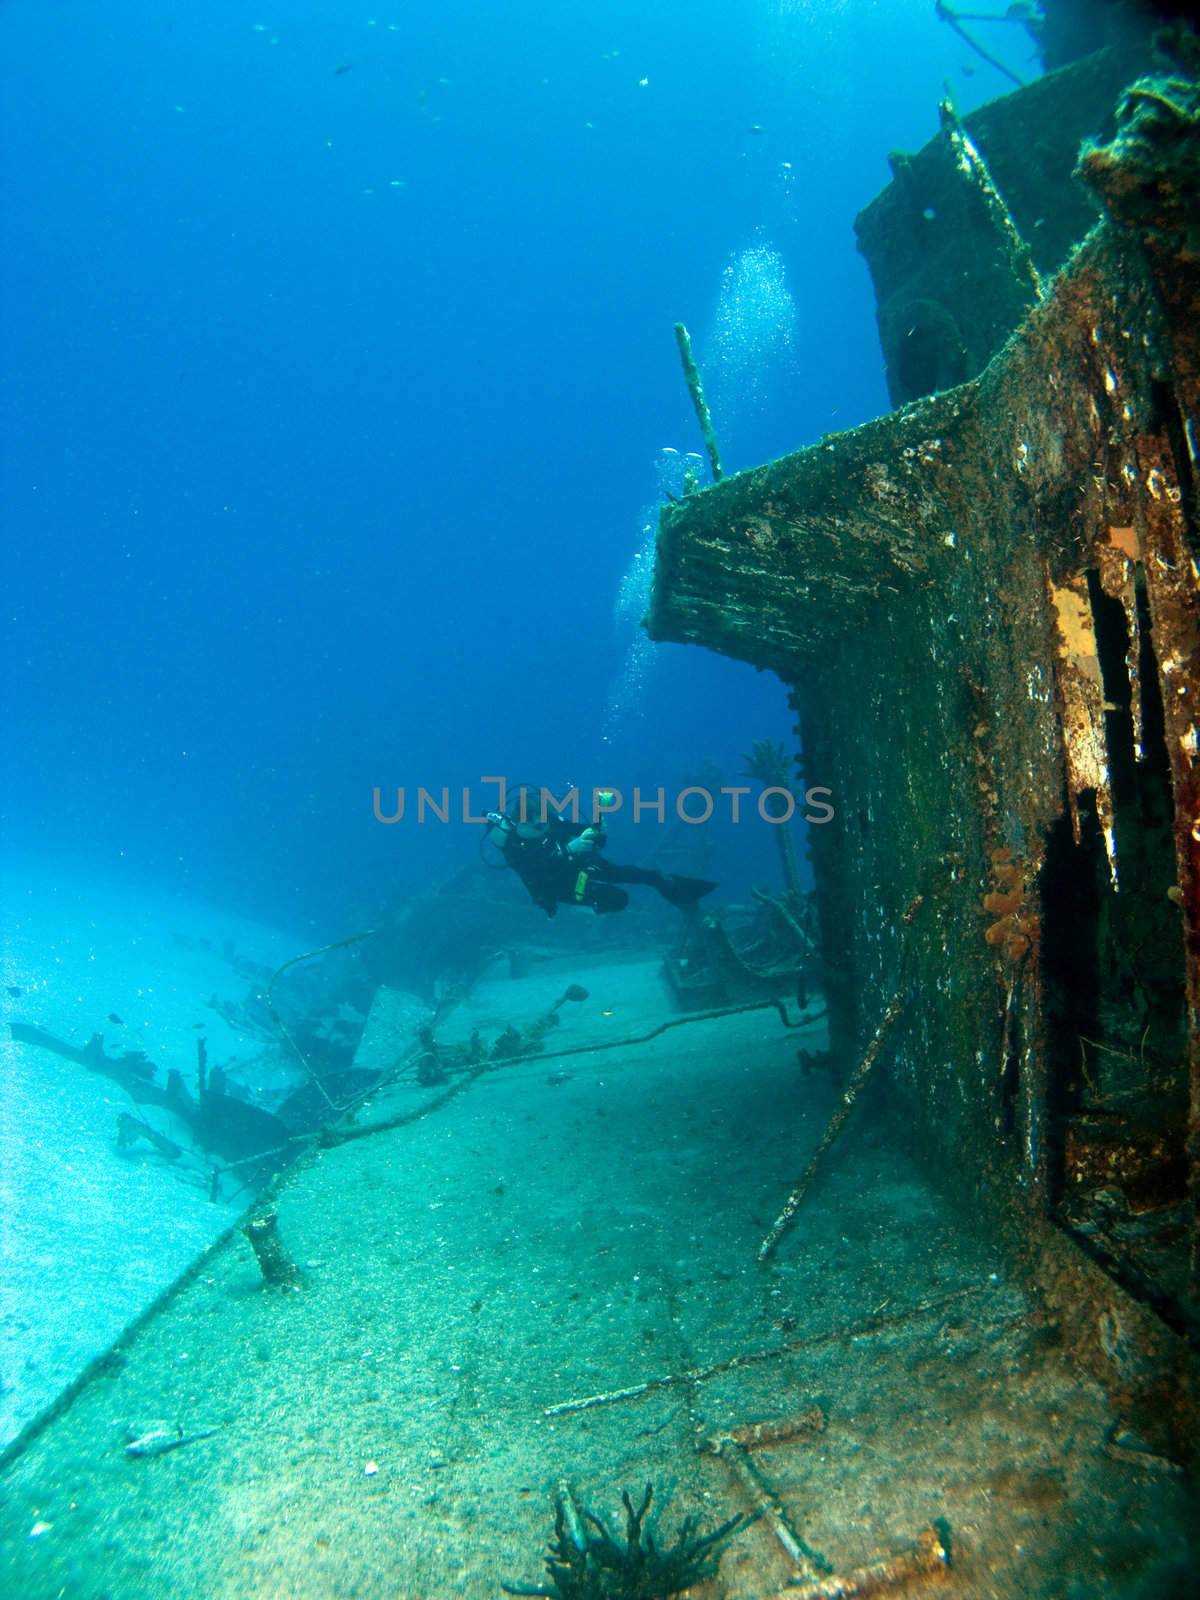 Underwater Photographer taking pictures of a Sunken Ship by KevinPanizza